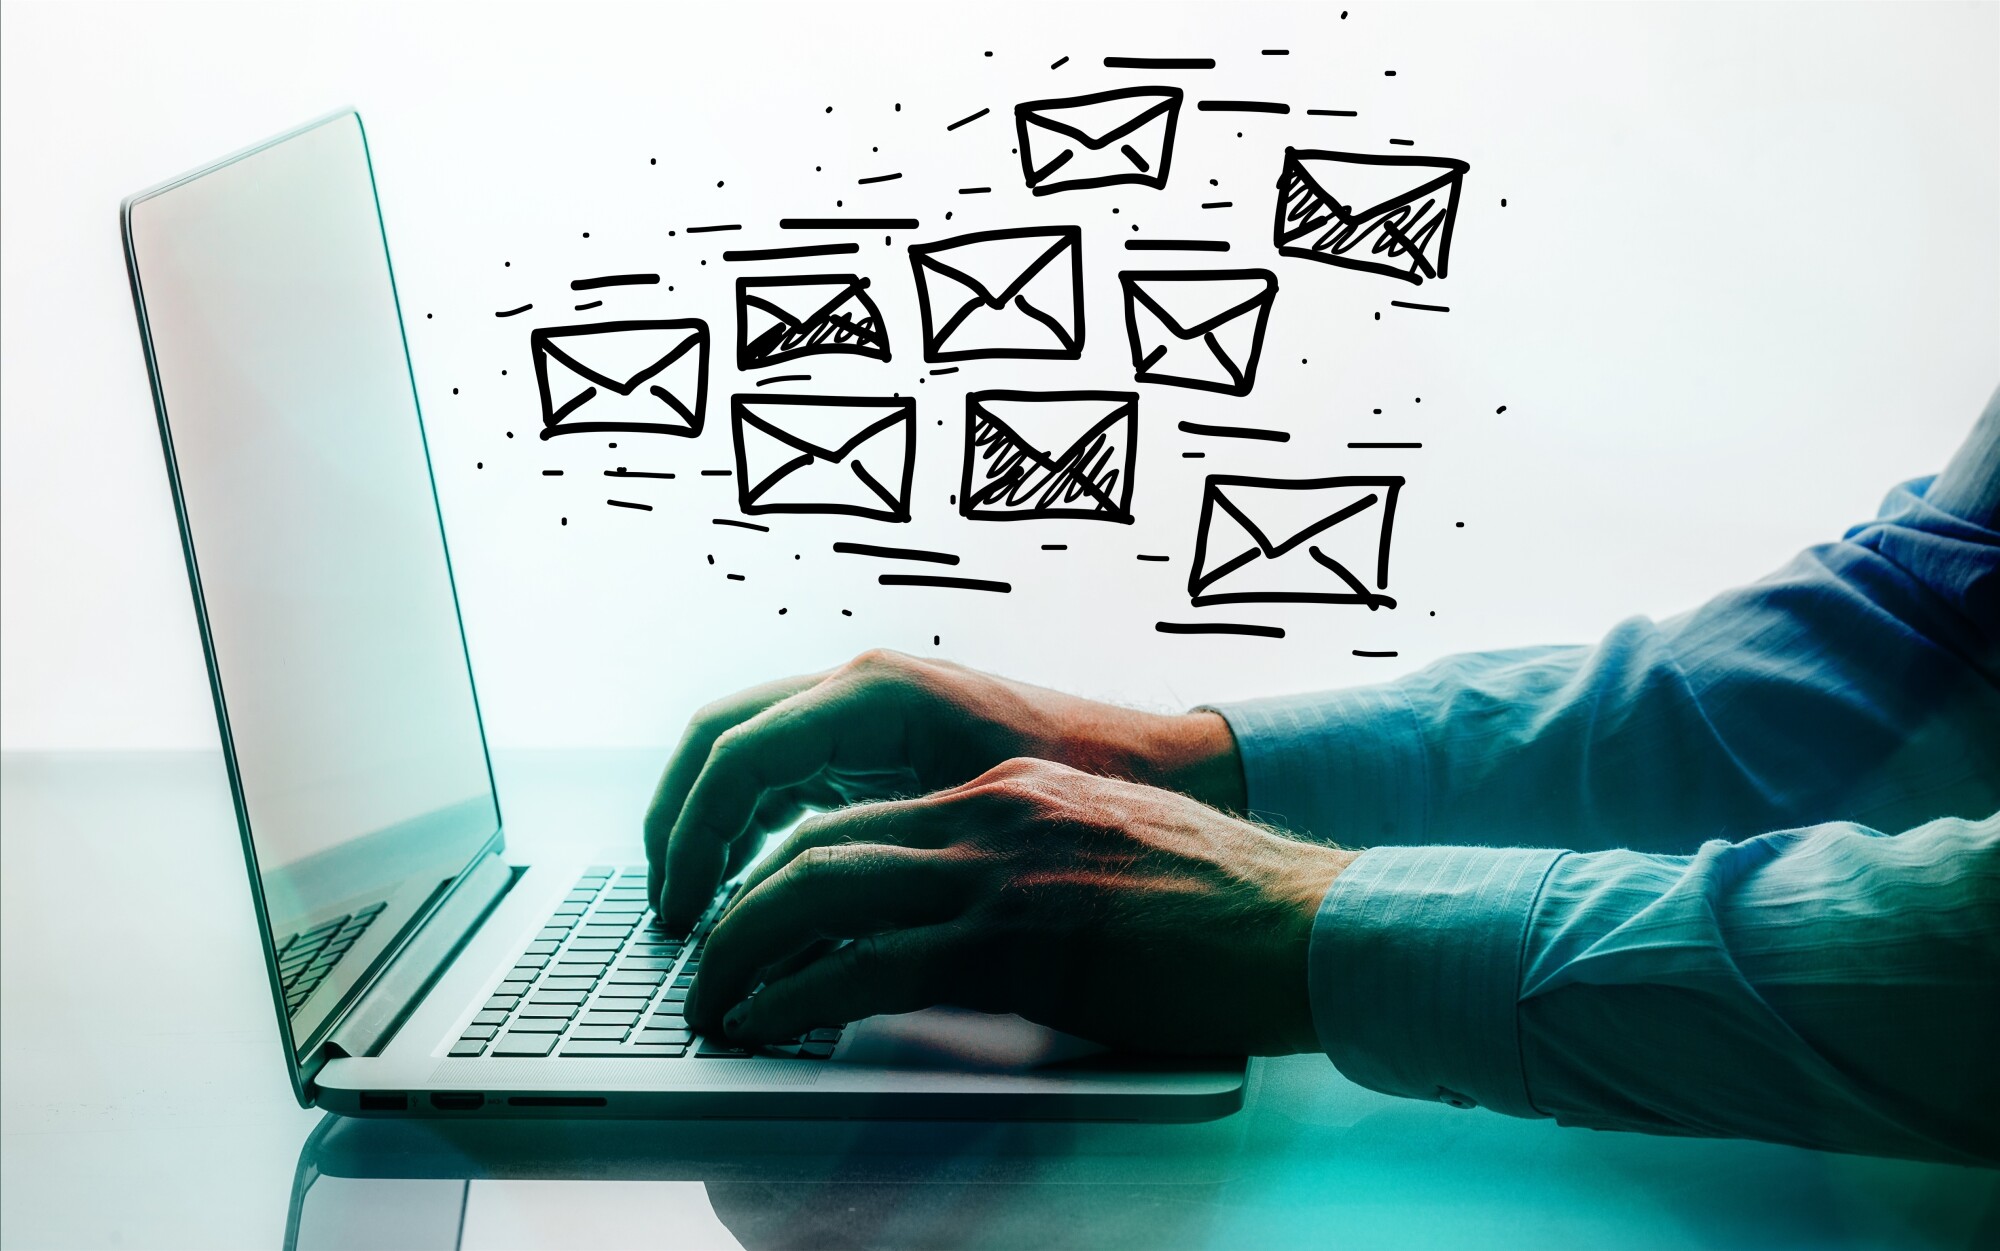 Check These 6 Things Before You Send Your Next Email Blast